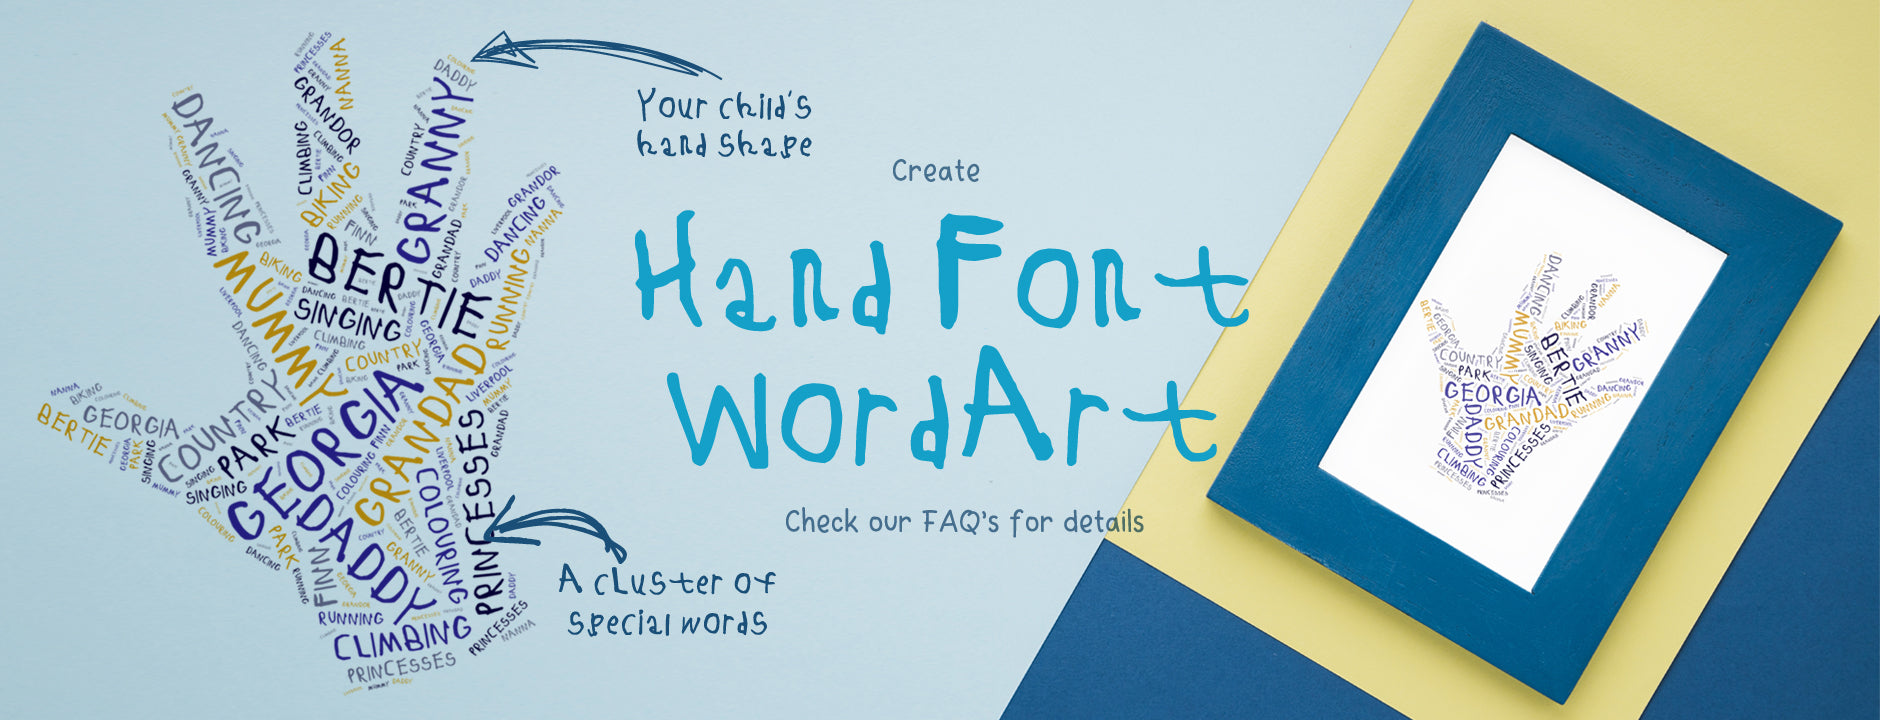 A wonderful creative gift - use your new font to create your own wordart. Perfect for a gift to mum, dad, grandparents, family and friends.